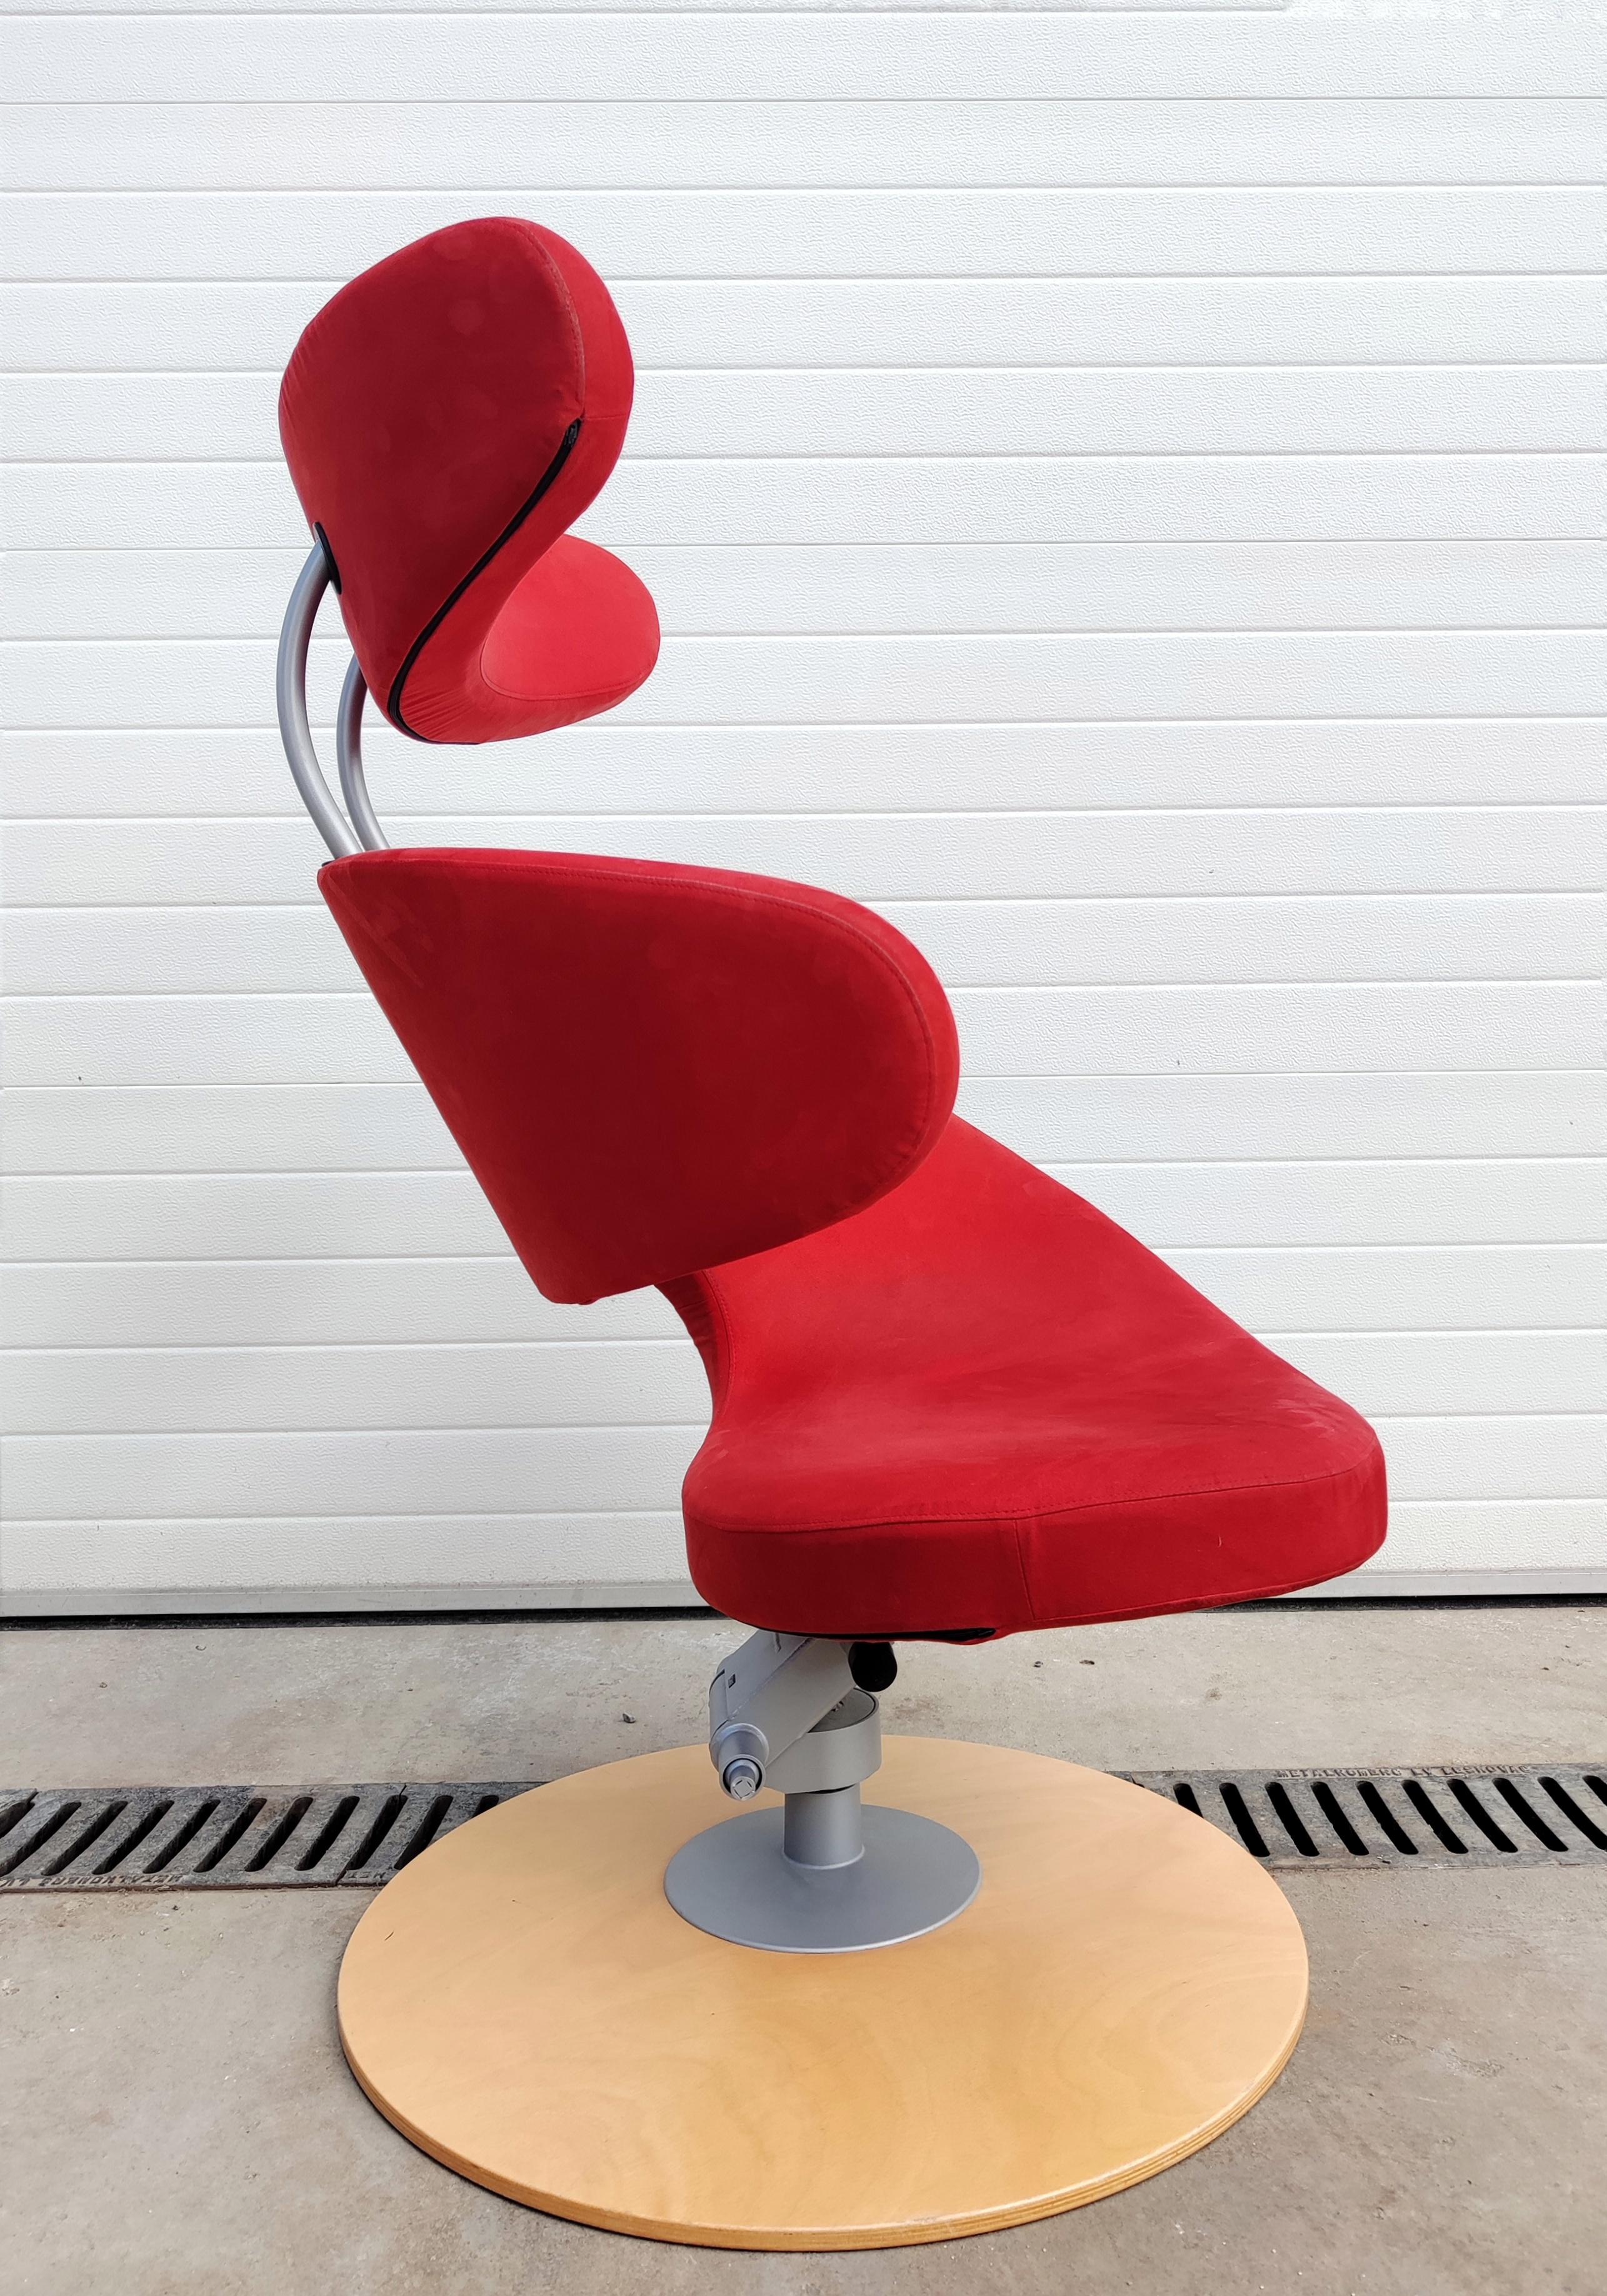 Contemporary 'Peel' Armchair or Swivel Chair Designed by Olav Eldoy, Norway, 2002 For Sale